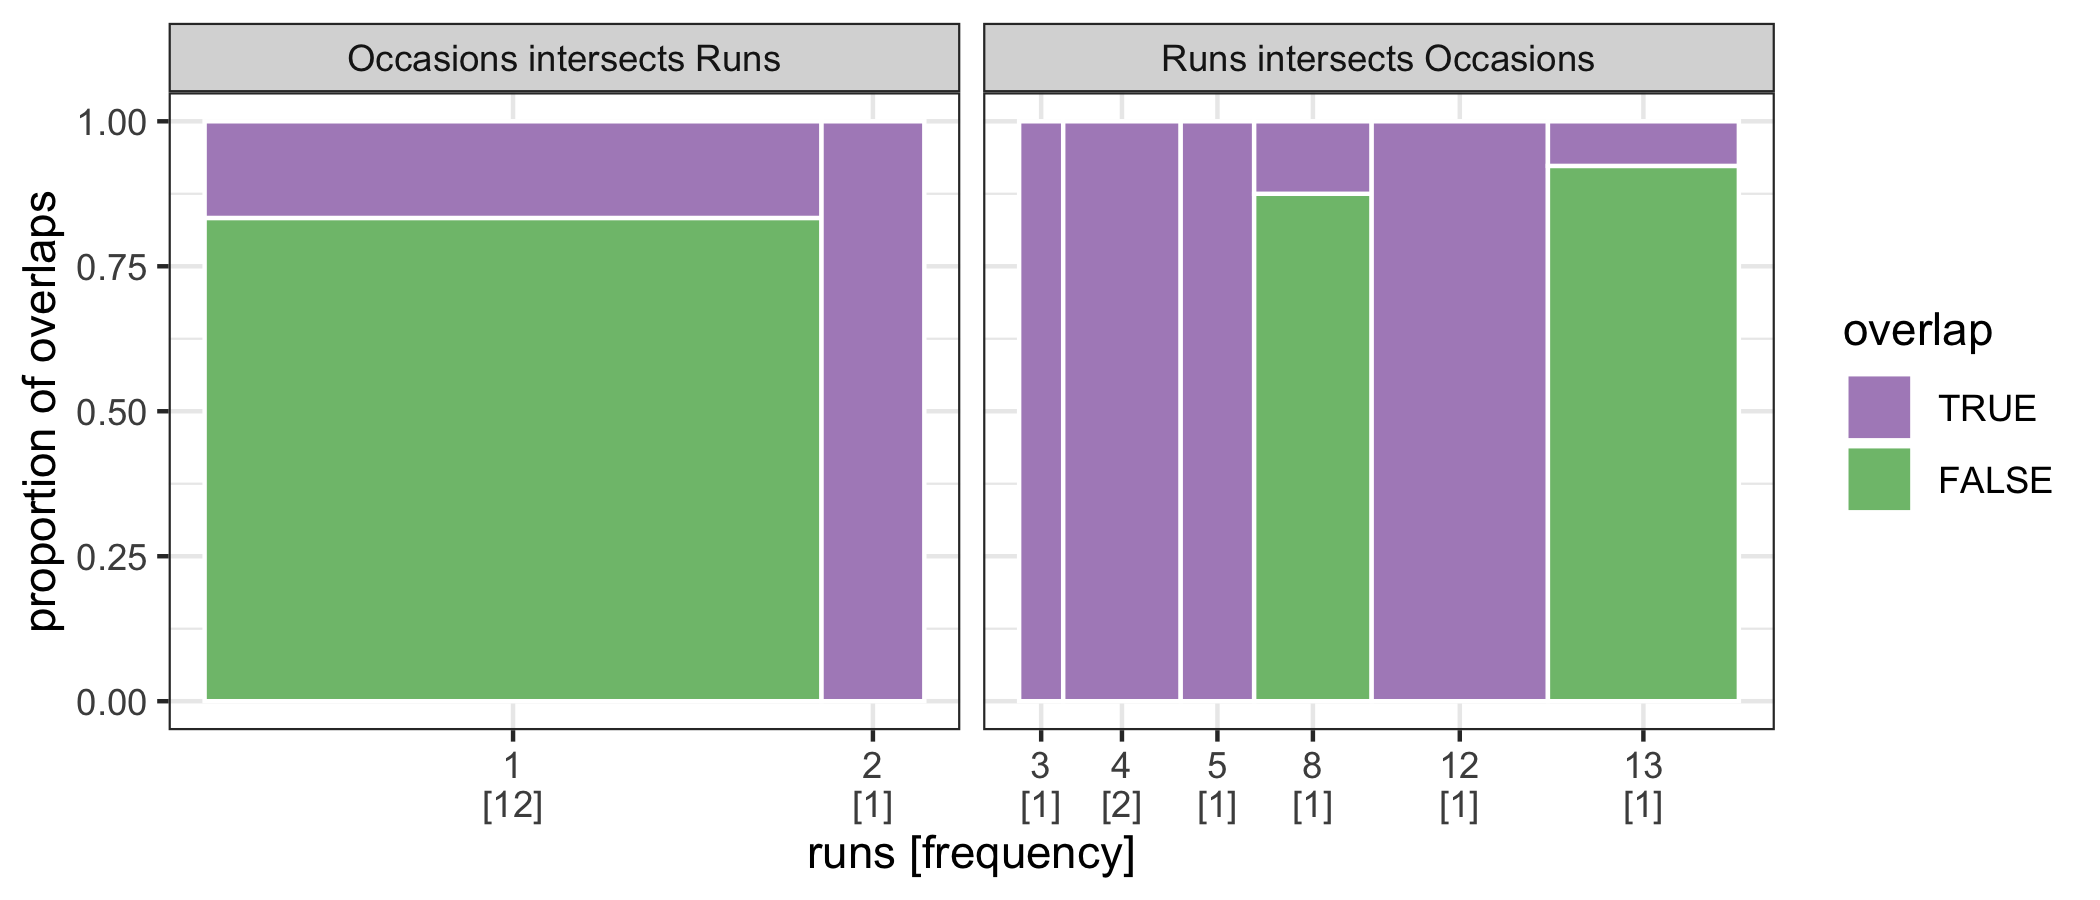 The spineplot is extended to temporal missing data for exploring associations based on their run lengths. The purple area highlights their intersections in time. The Runs type overlaps the Occasions in the longer run.